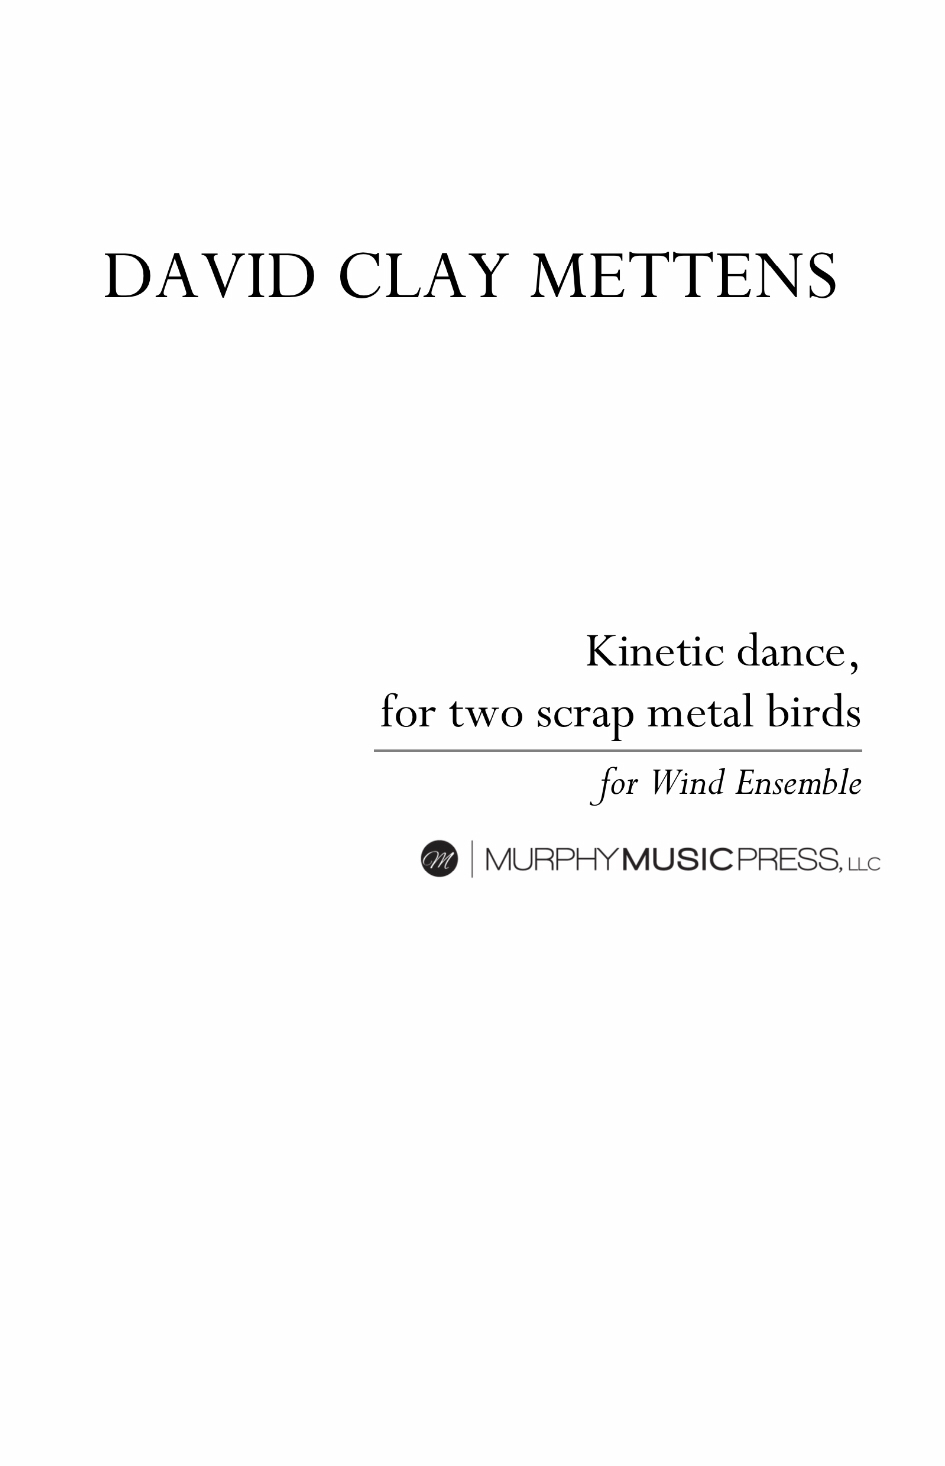 Kinetic Dance For Two Scrap Metal Birds (Score Only) by David Clay Mettens